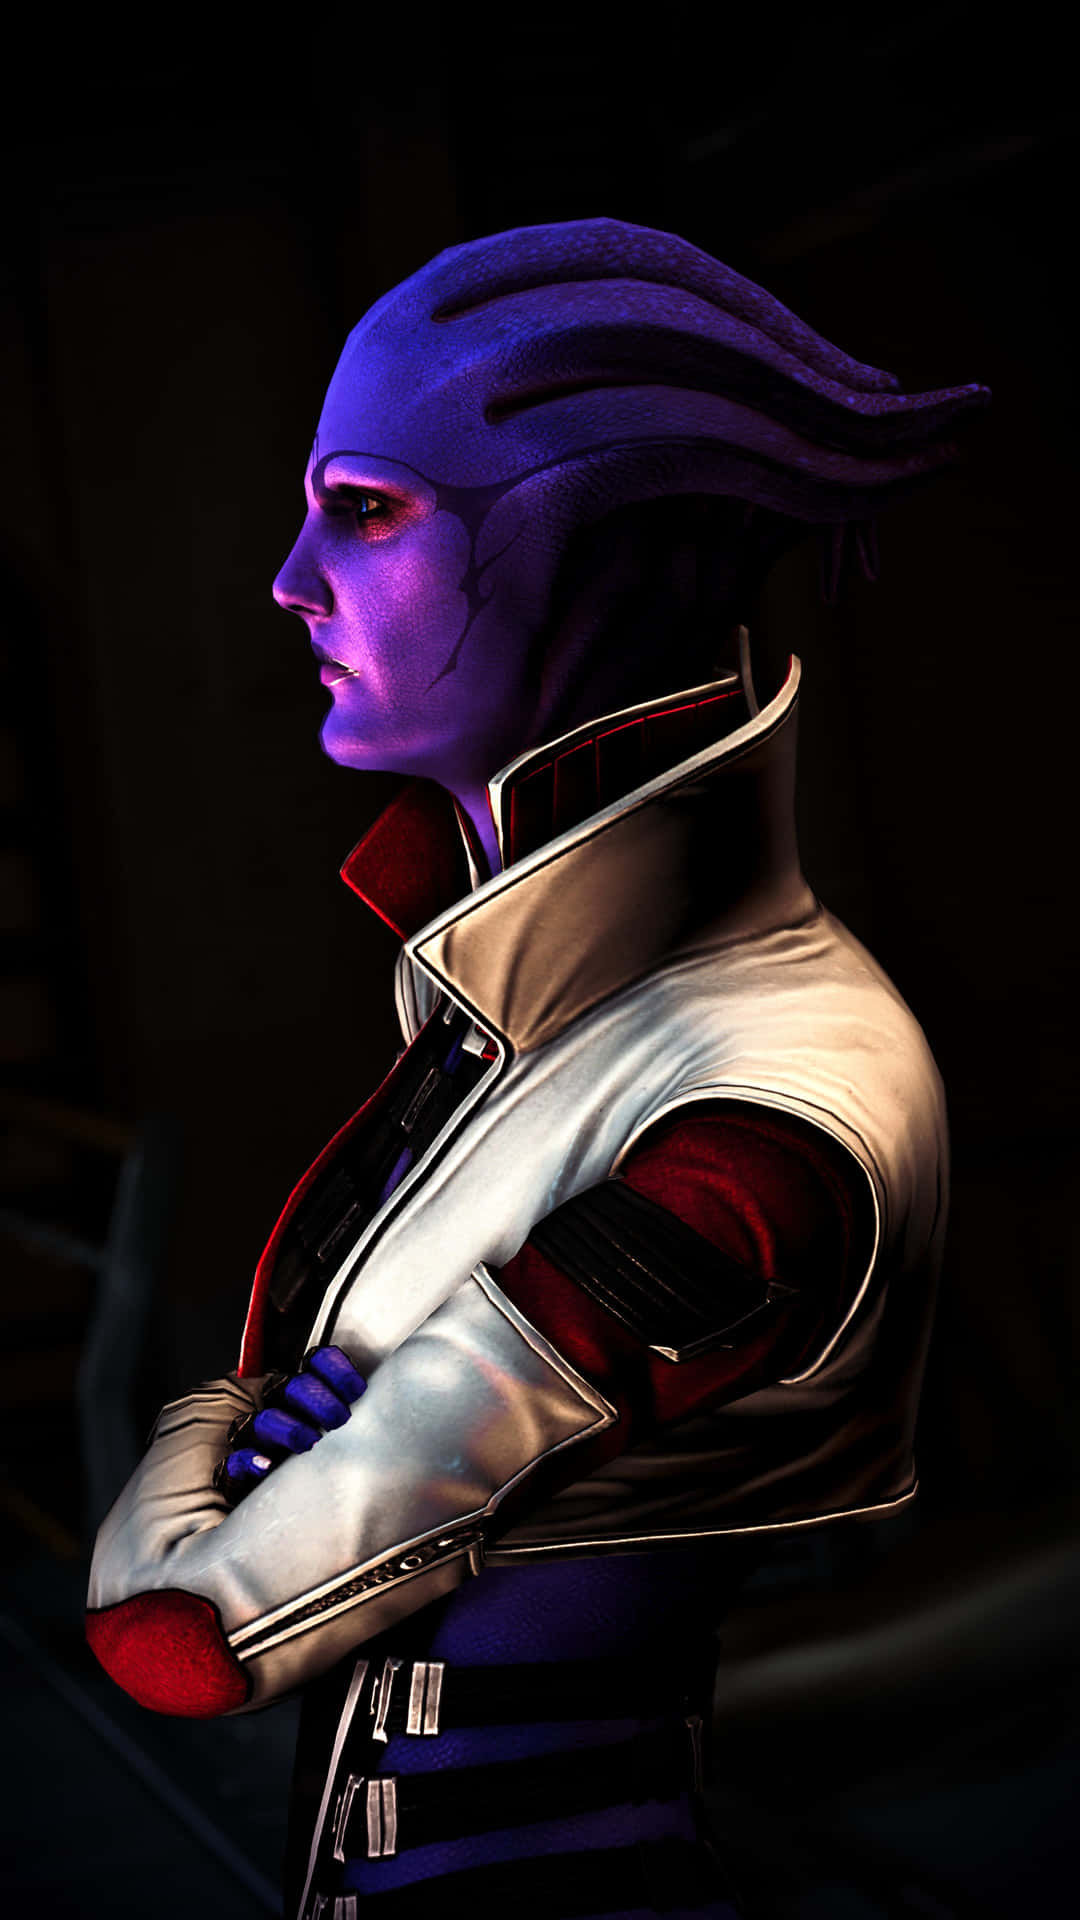 Aria T'Loak, the influential crime lord from Mass Effect, posing with determination. Wallpaper